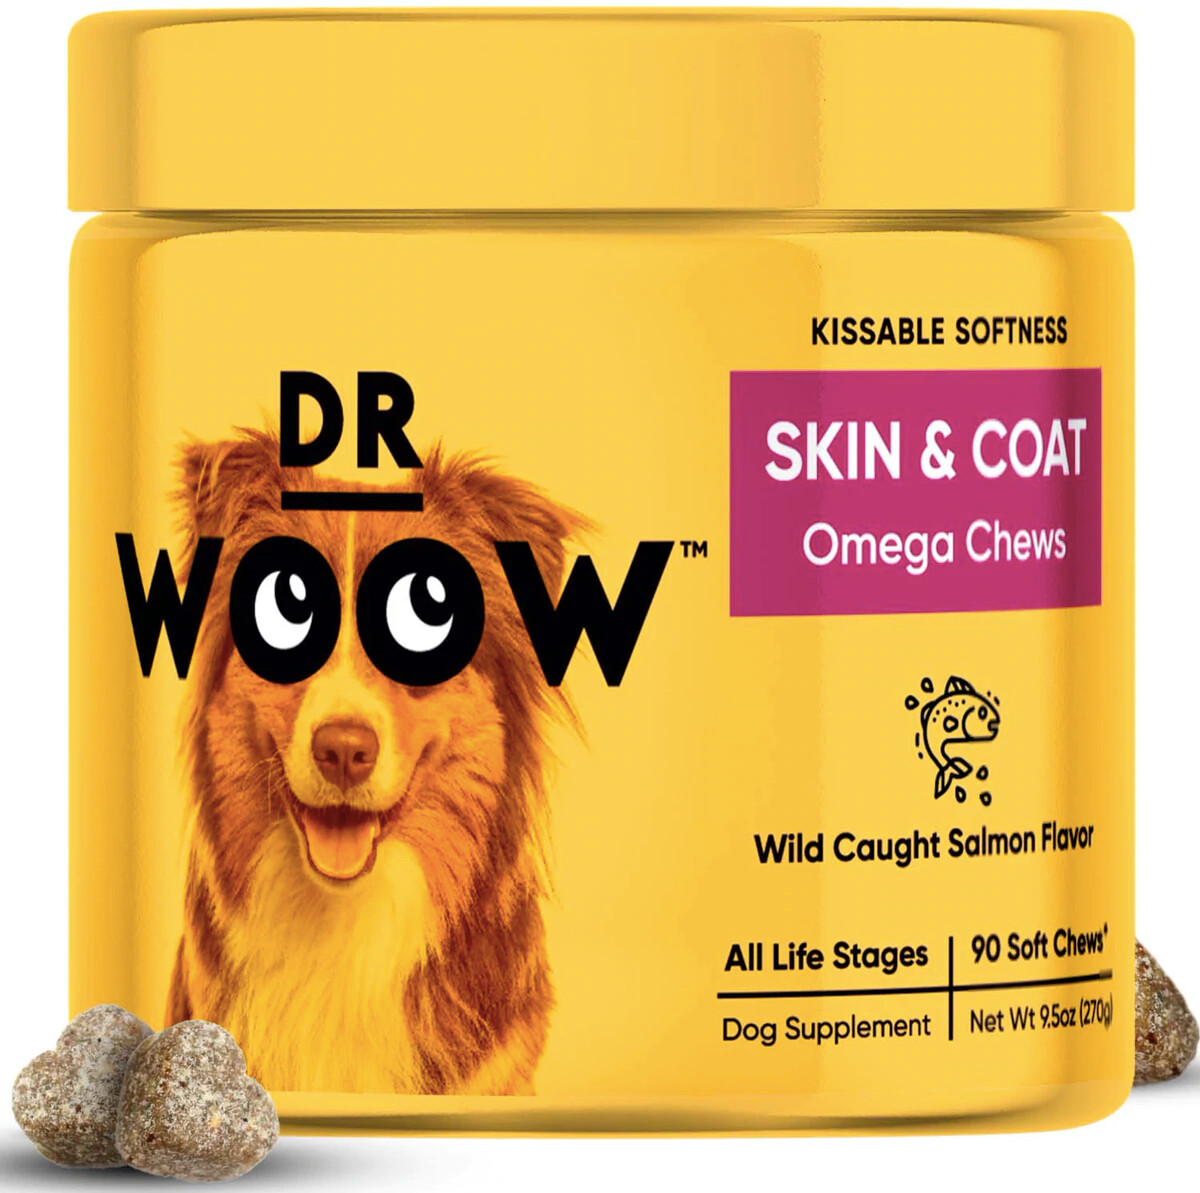 Dr Woow Chewables Skin & Coat Supplements For Dogs